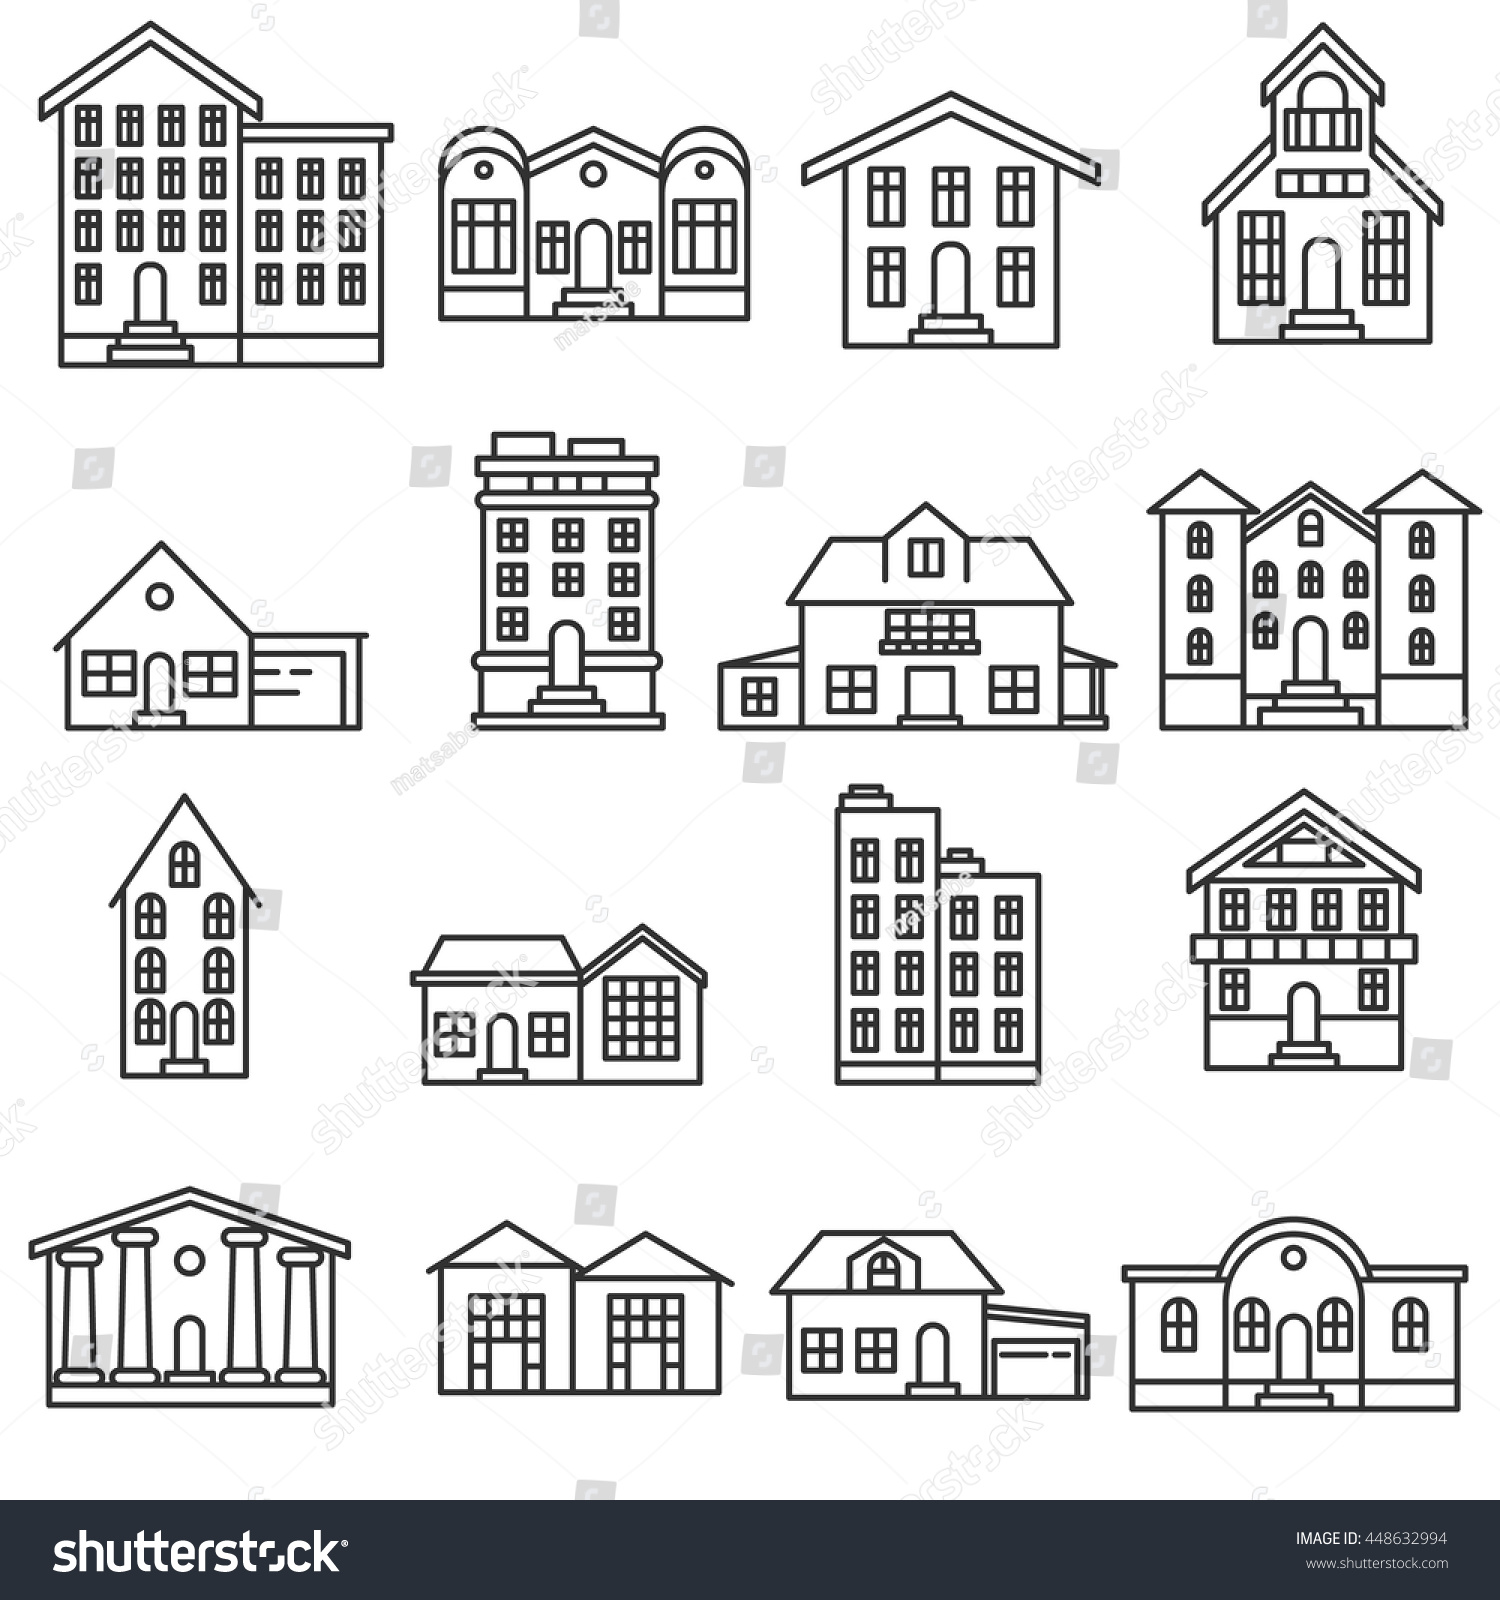 Building Set Thin Line Design Buildings Stock Vector (Royalty Free ...